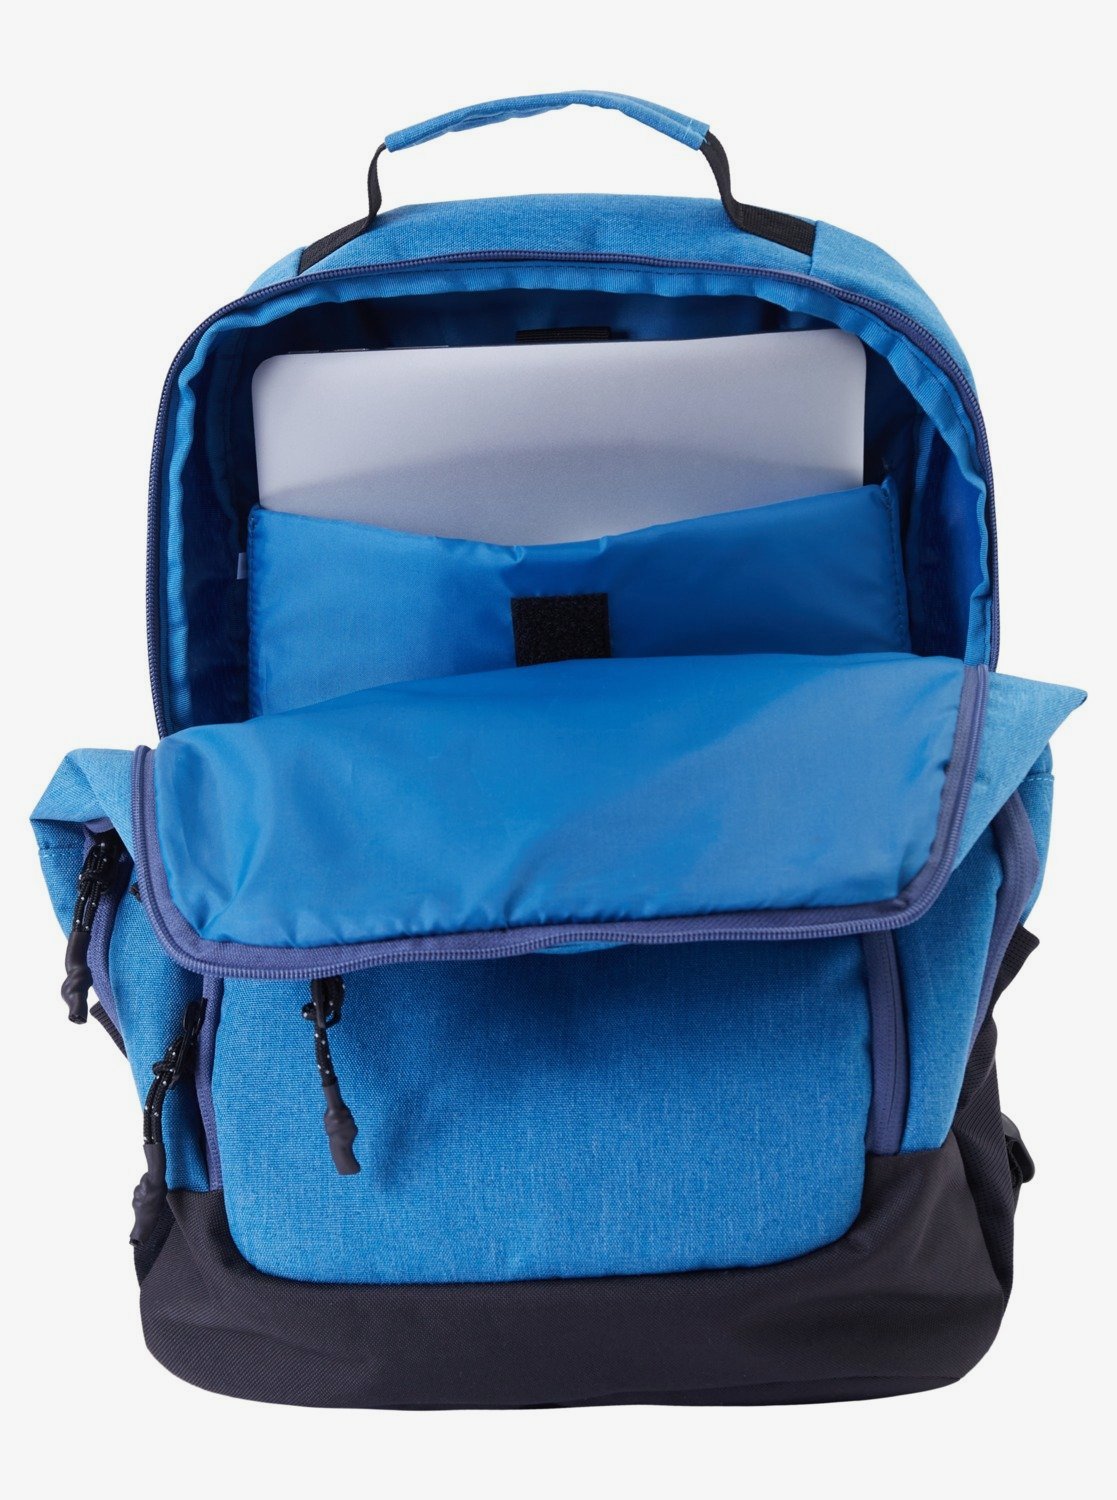 Quiksilver Backpack 1969 Special - 28L Backpack